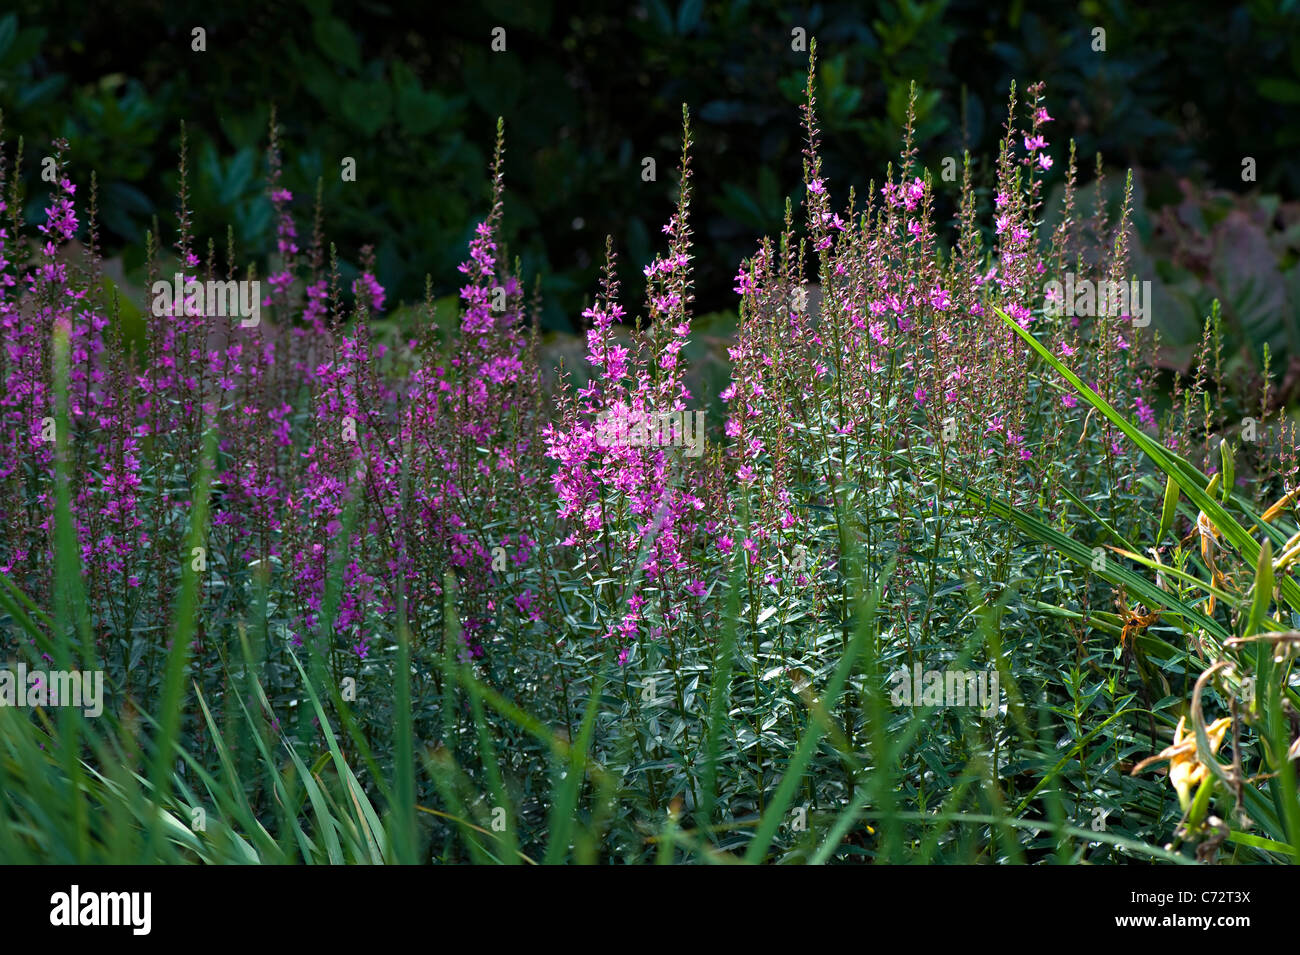 Close-up sunny image of Purple salvia flowers in an herbaceous border. Stock Photo